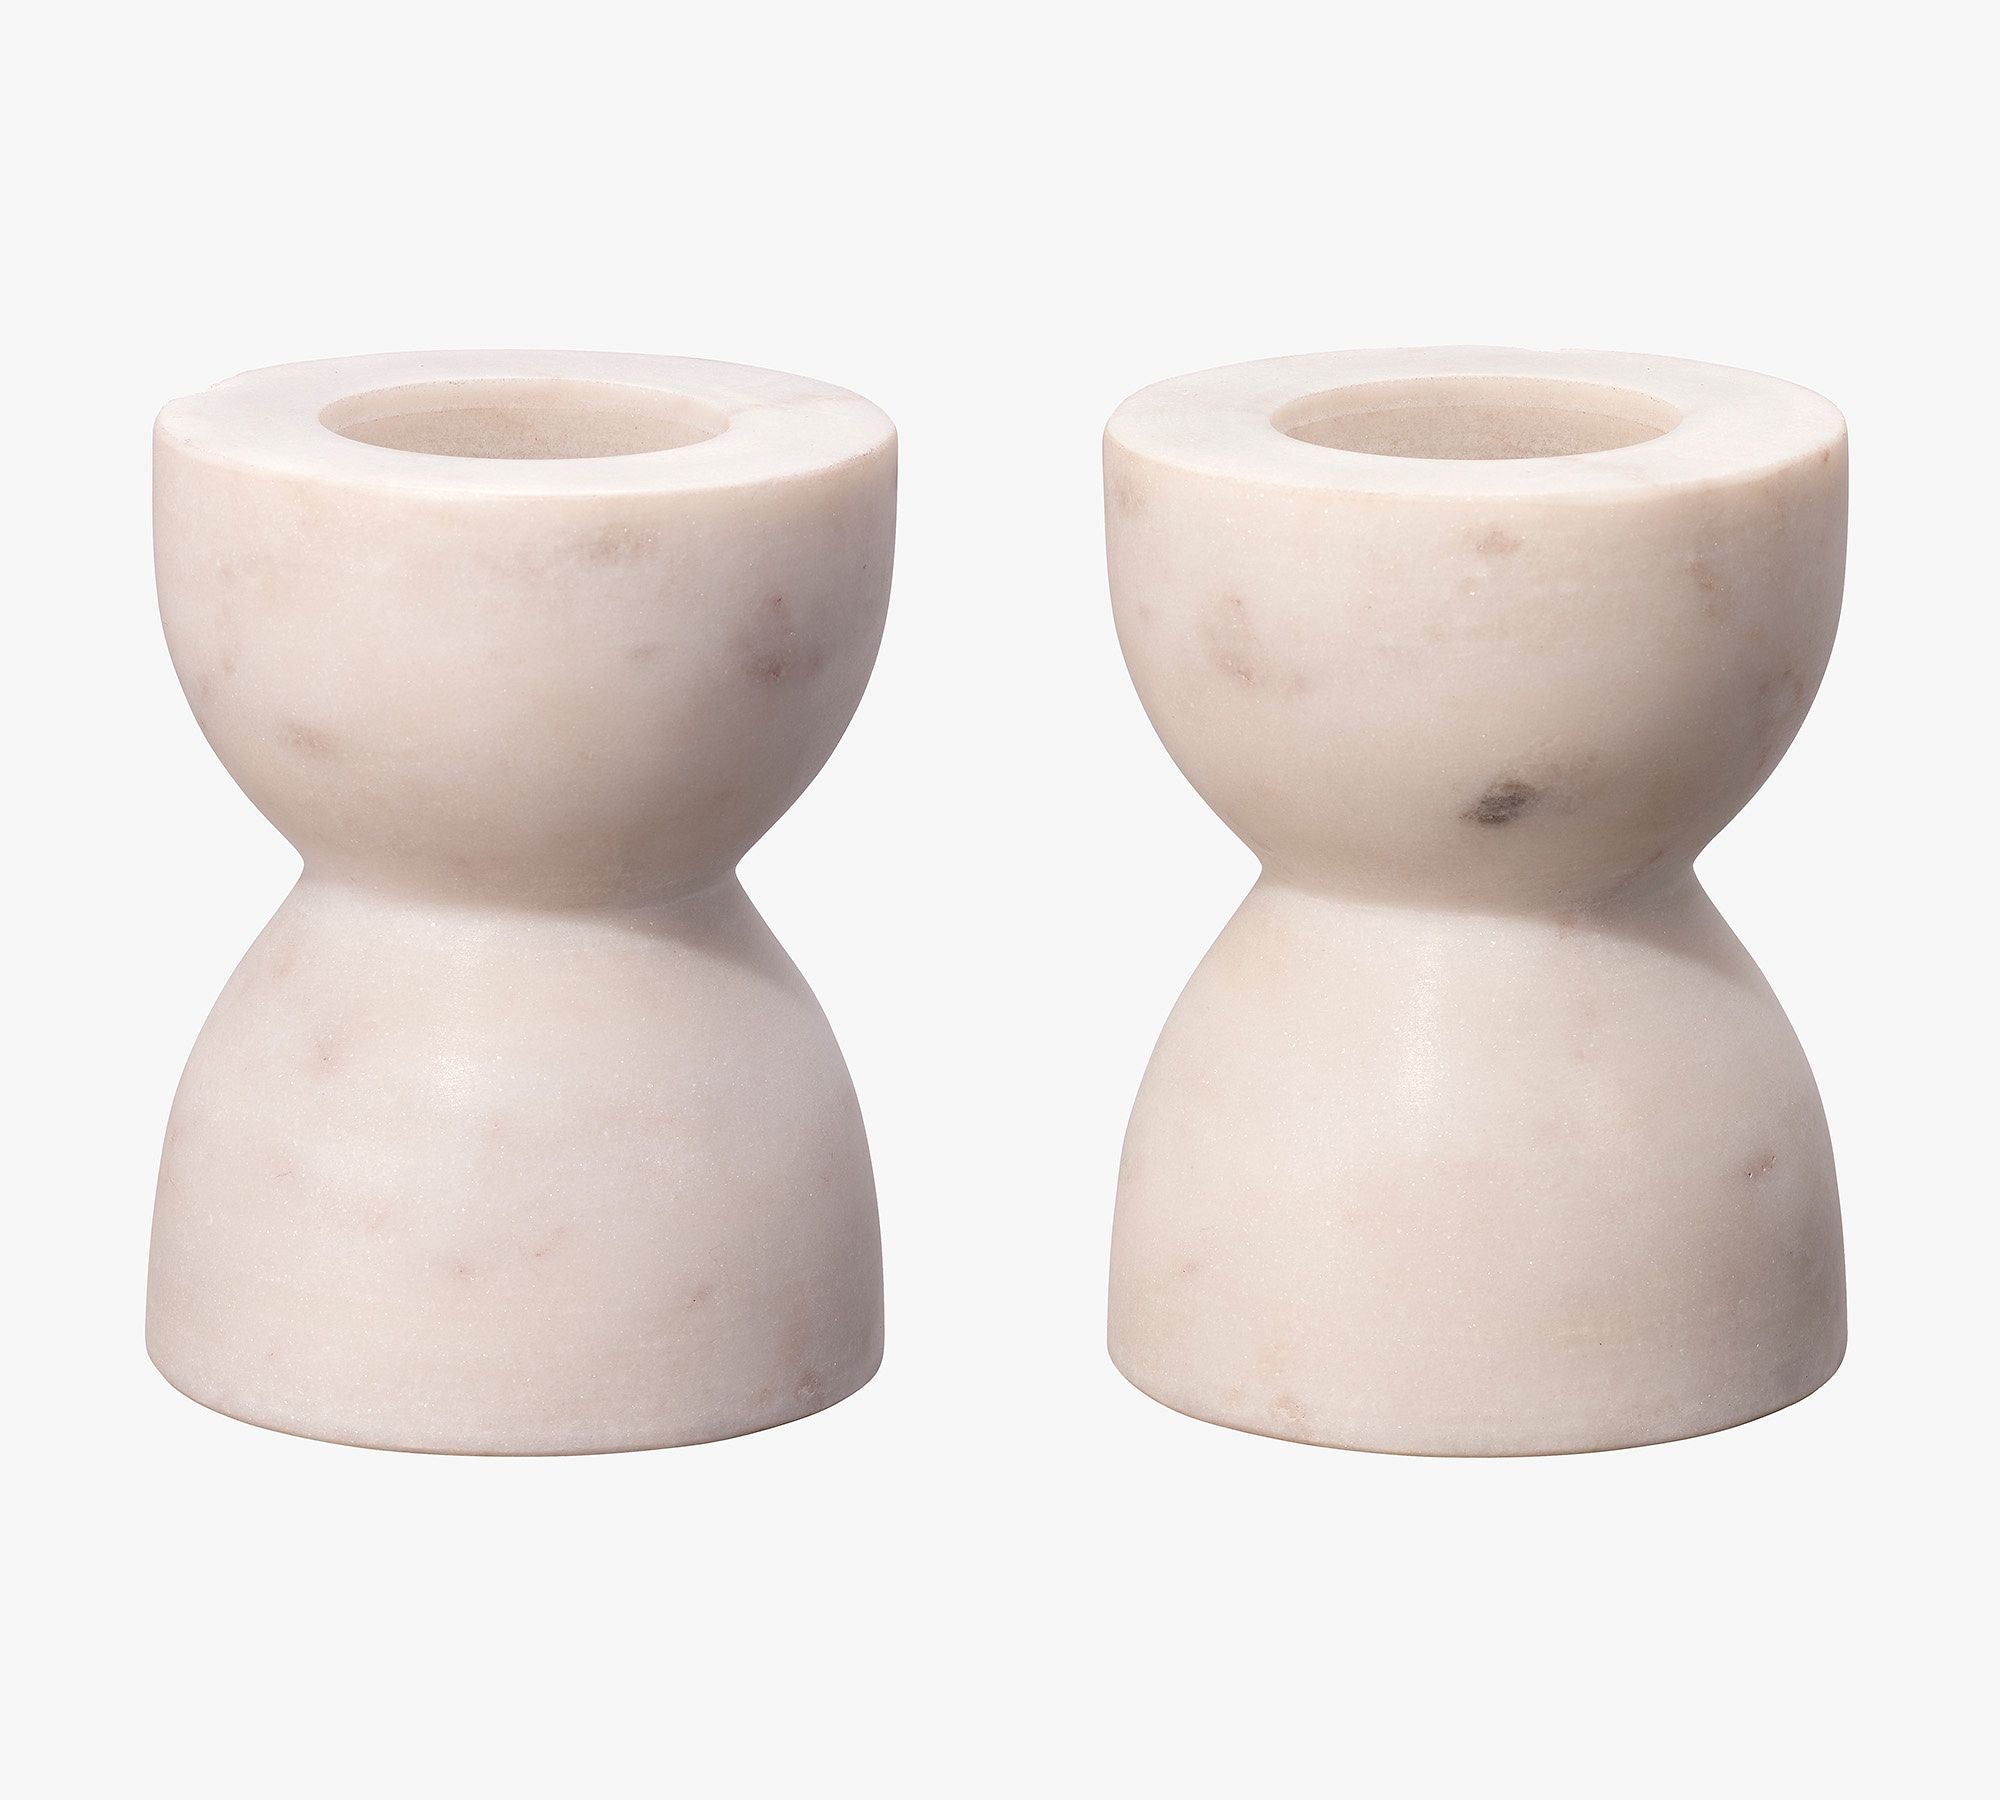 williams-marble-candlestick-holders-set-of-2-xl_2.jpg